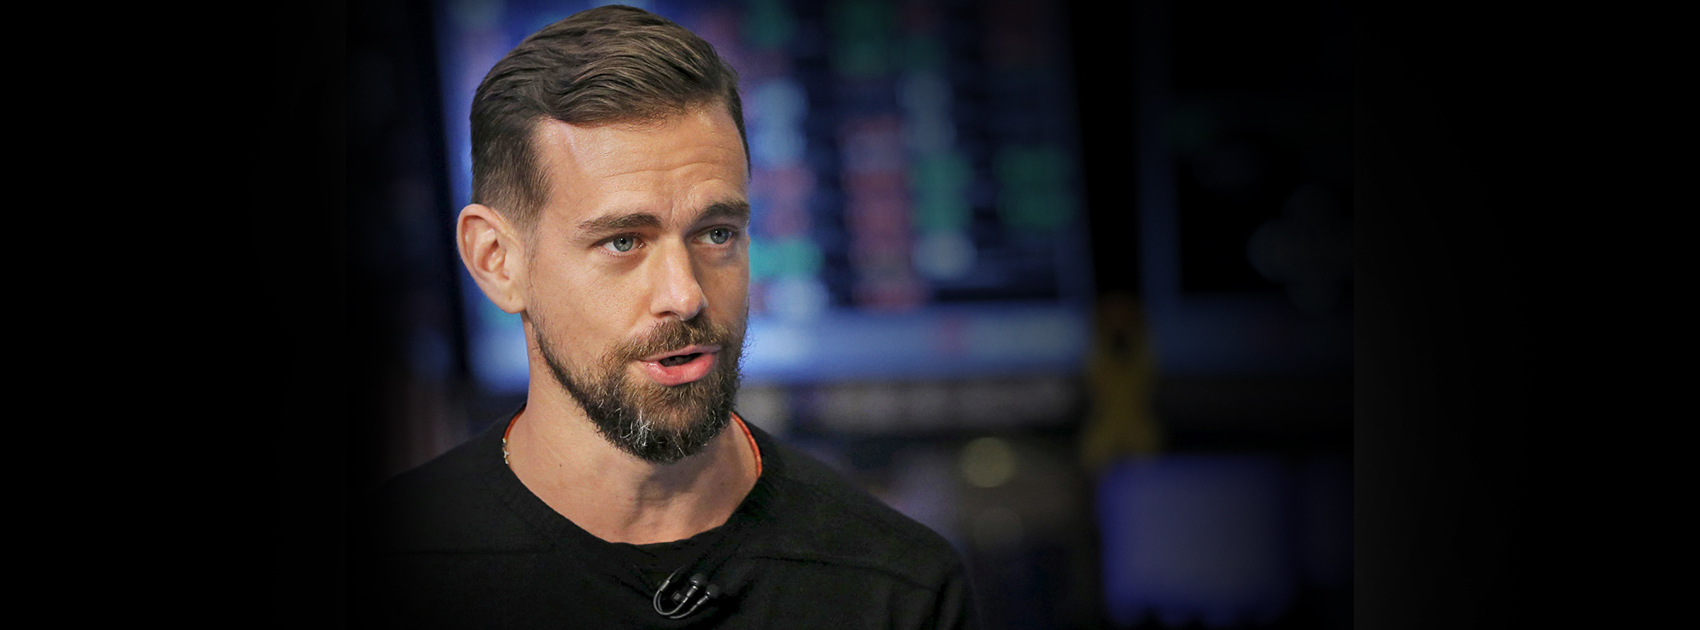 Jack Dorsey Life Lessons,Jack Dorsey Learn Worthy Facts,Latest Startup News India,startup stories,Best Startups in India 2018,Twitter CEO Jack Dorsey Life Lessons,CEO of Twitter,Jack Dorsey Success Lessons,Leadership Lessons From Twitter CEO,Jack Dorsey Inspiration Story